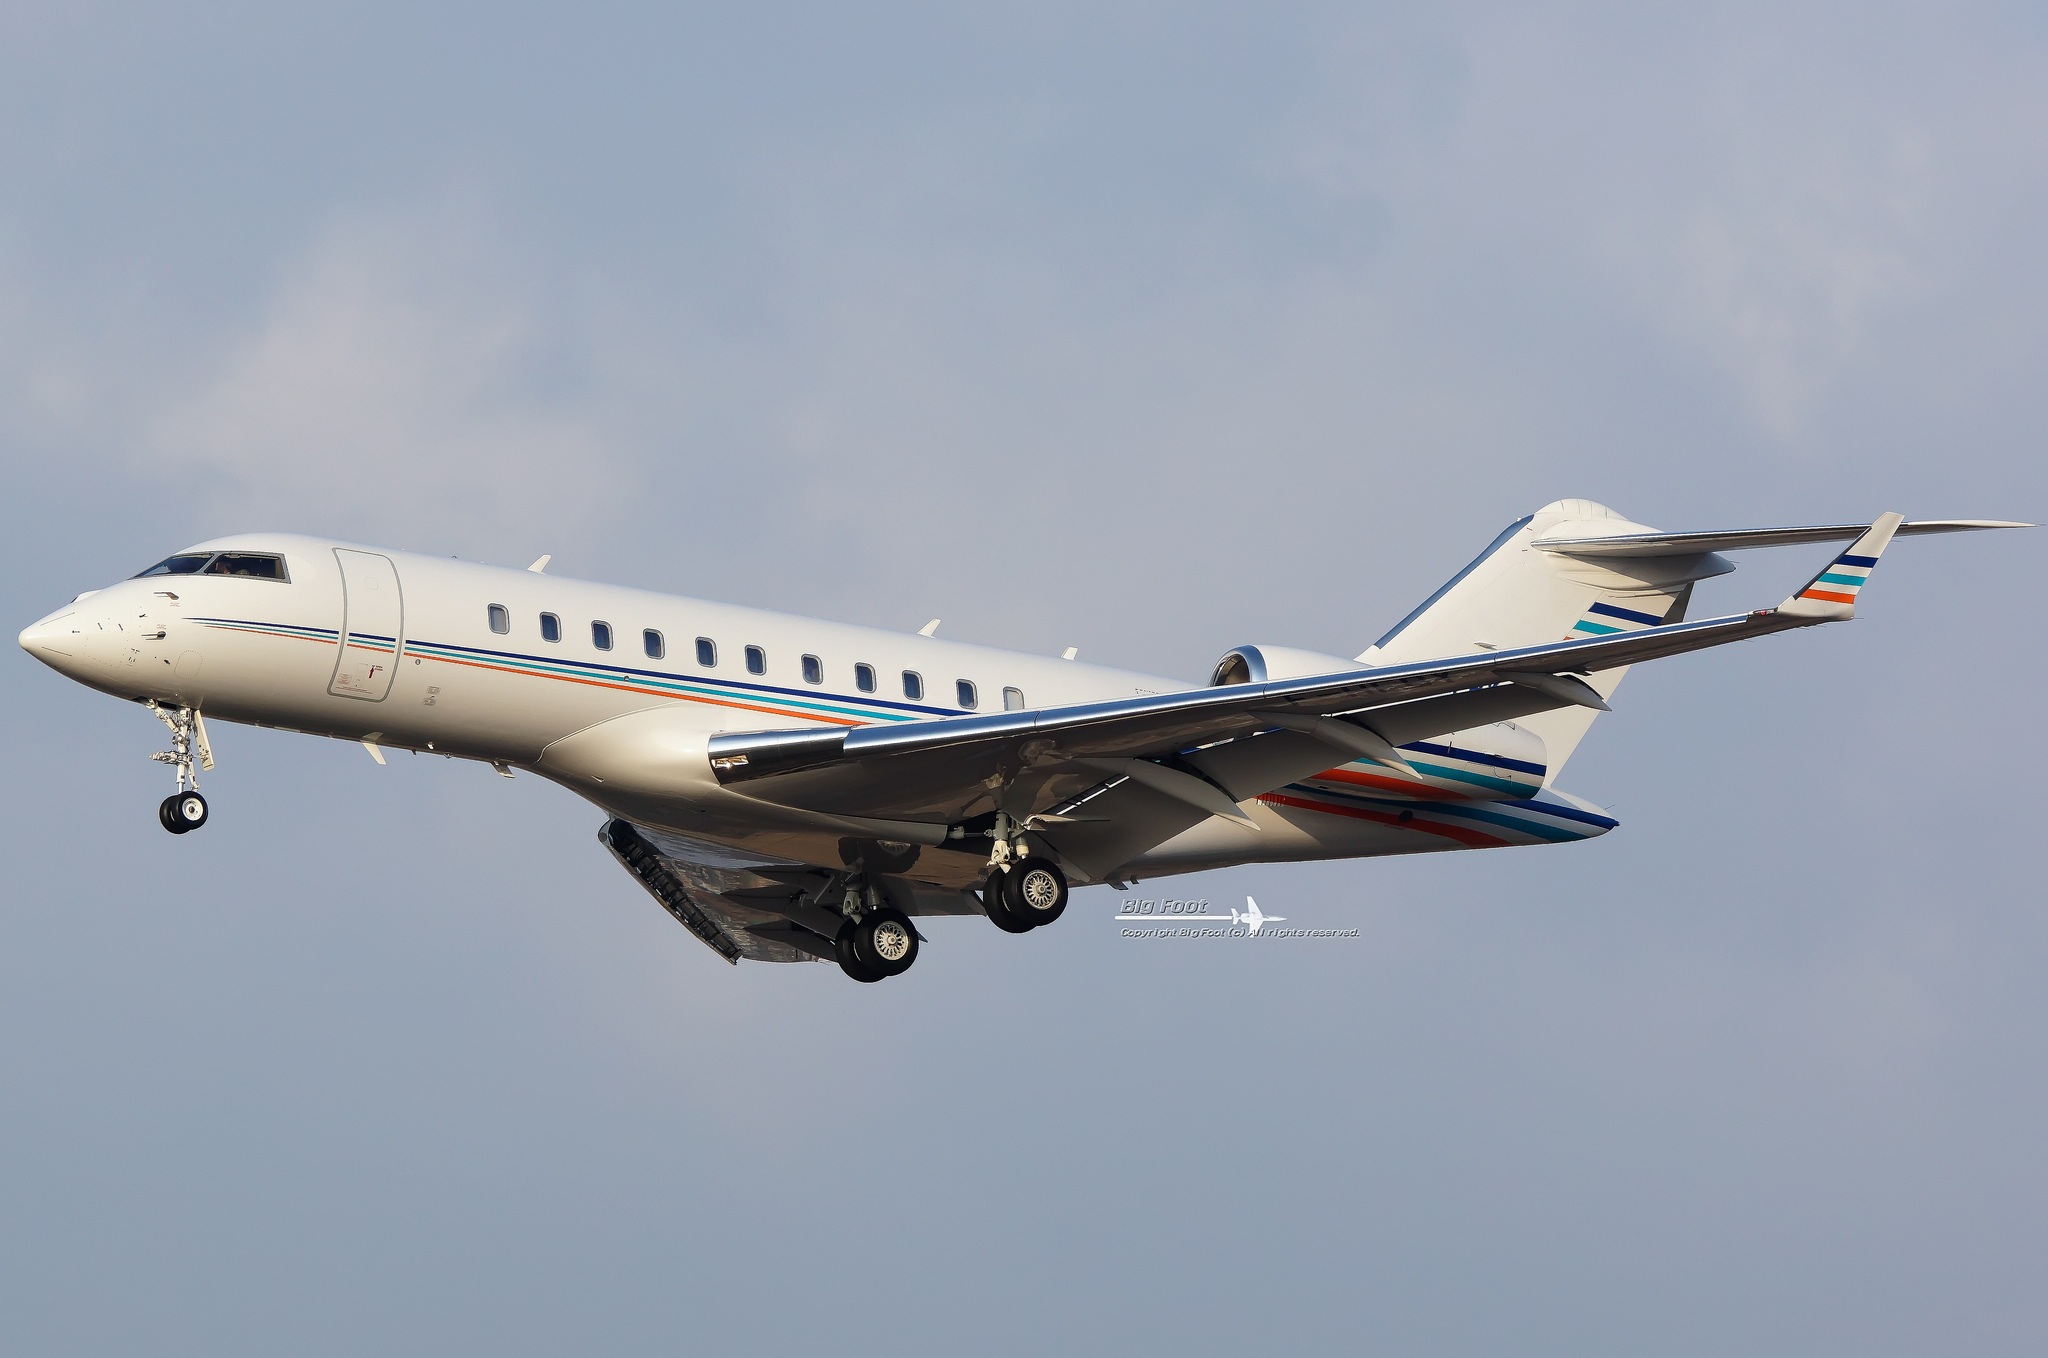 Untitled (Bouygues) Bombardier BD-700-1A11 Global 5000 F-HFBY par DAIHYUN JI sous (CC BY-ND 2.0) https://www.flickr.com/photos/96445405@N05/10245445833/ https://creativecommons.org/licenses/by-nd/2.0/